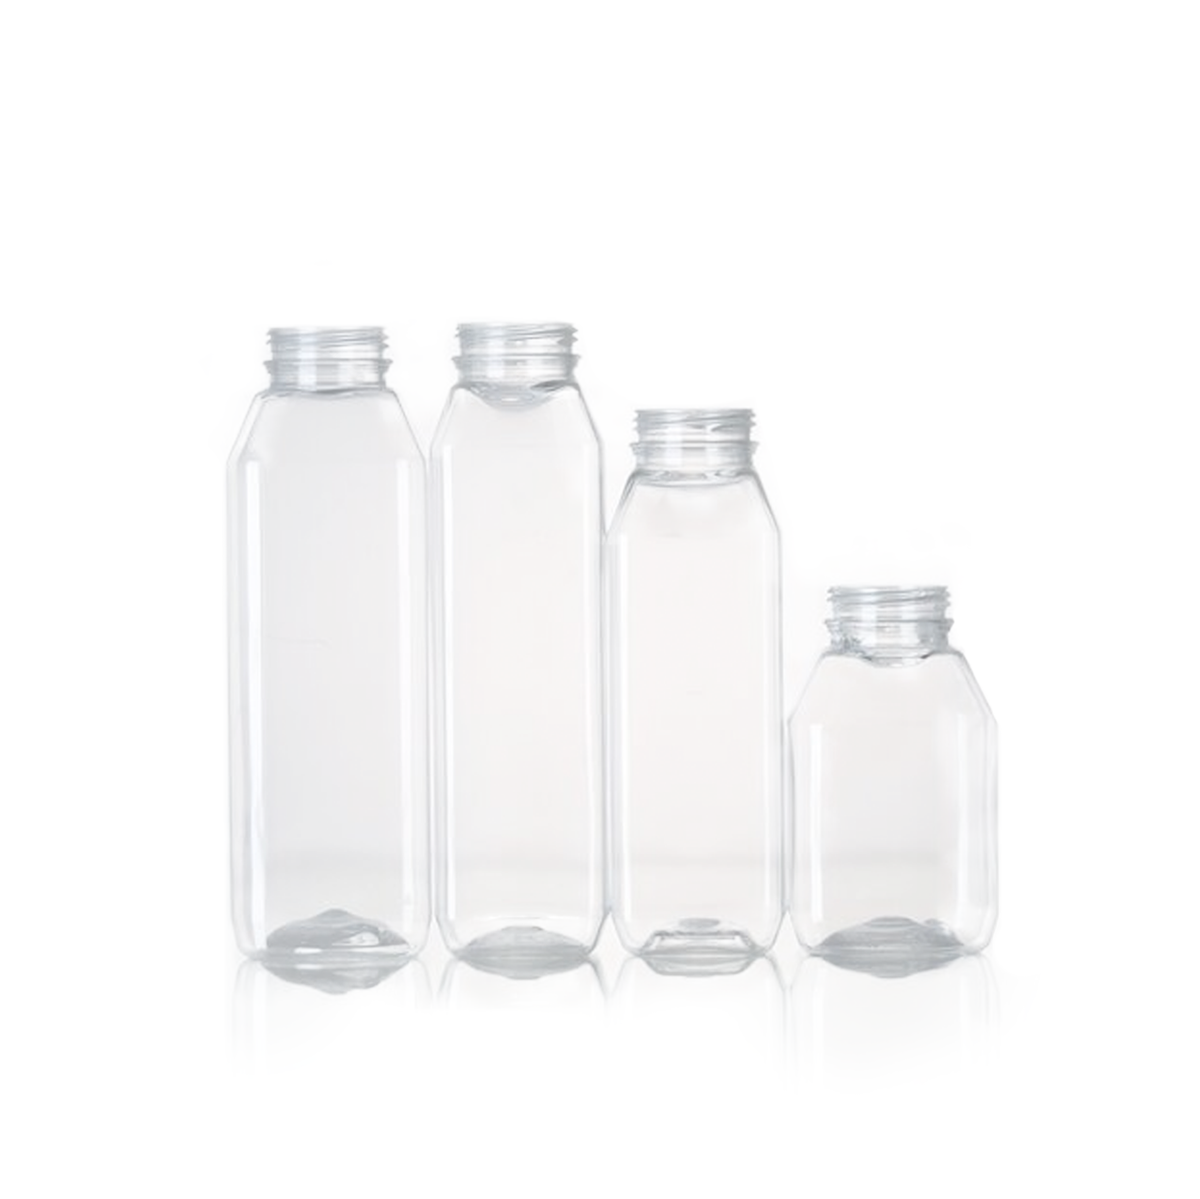 36pcs 12oz Reusable Water Bottles Clear Bulk Drink Containers for